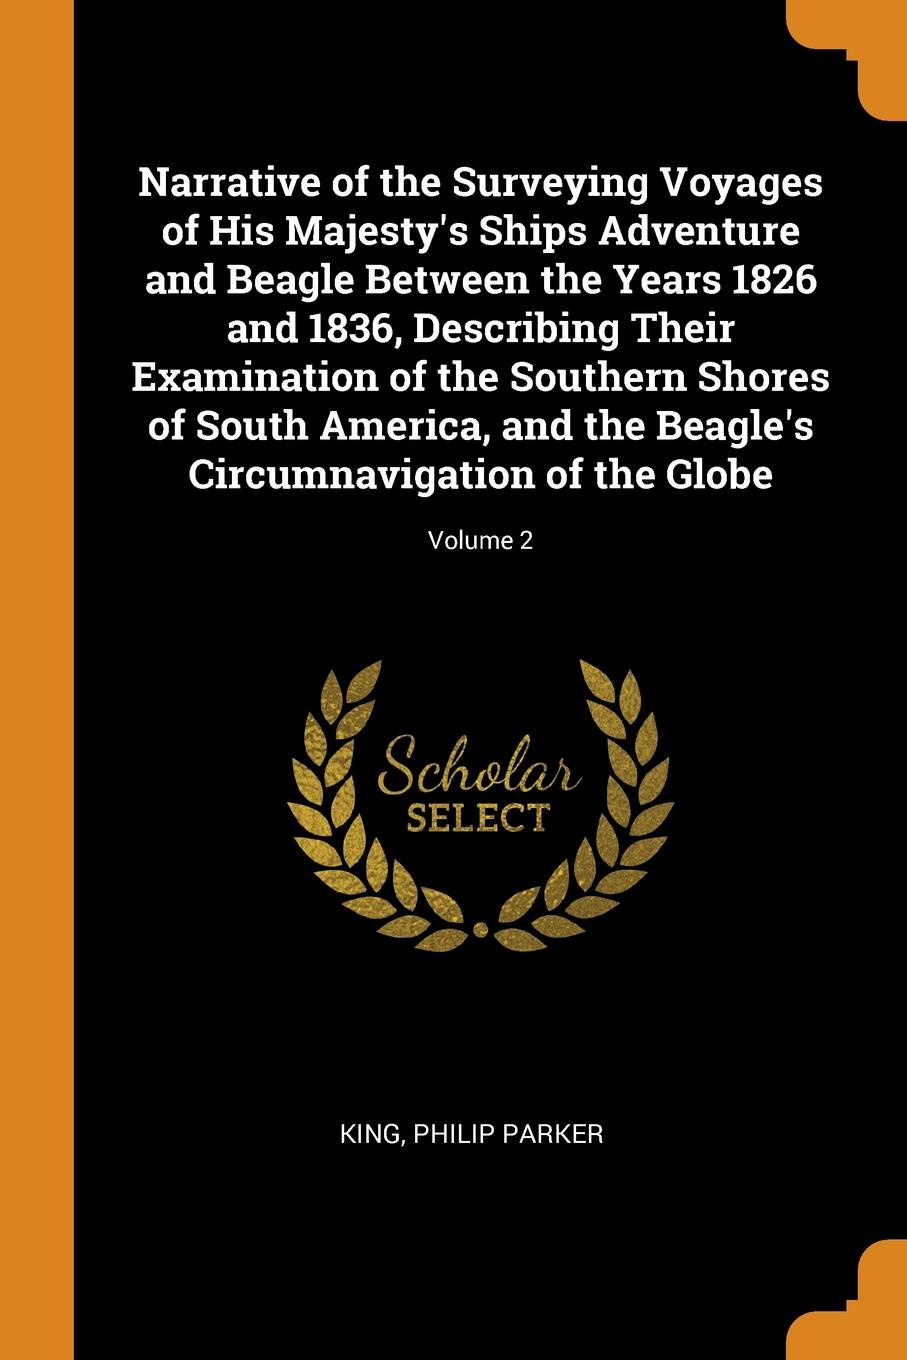 Narrative of the Surveying Voyages of His Majesty.s Ships Adventure and Beagle Between the Years 1826 and 1836, Describing Their Examination of the Southern Shores of South America, and the Beagle.s Circumnavigation of the Globe; Volume 2